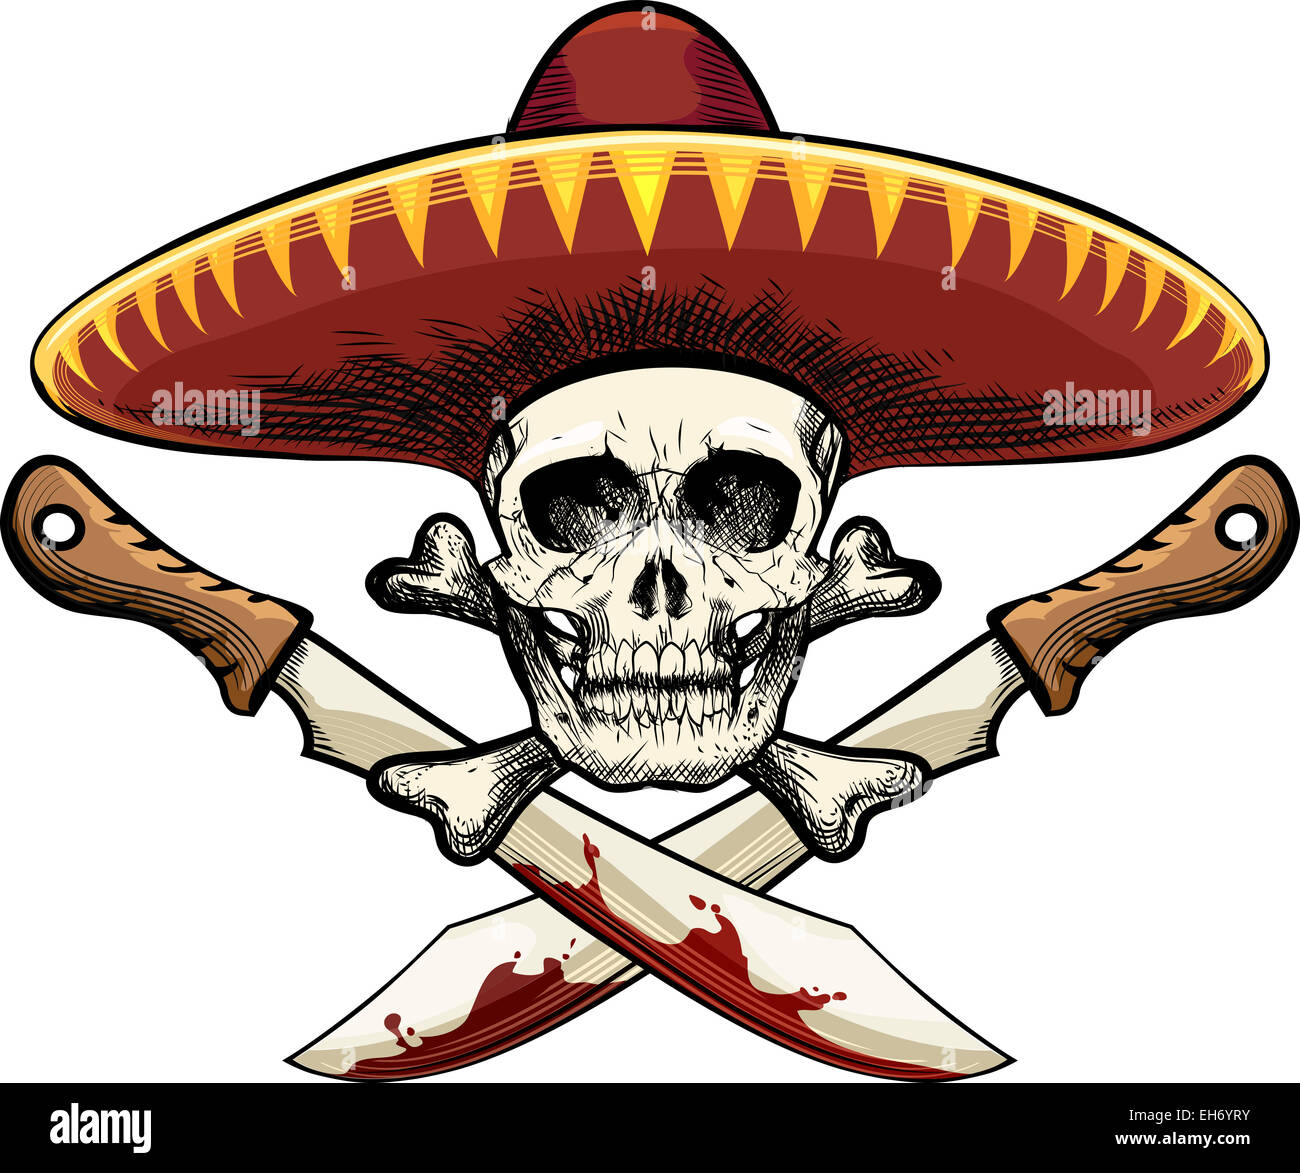 Illustration of skull in sombrero against two machetes drawn in tattoo sketch style Stock Photo